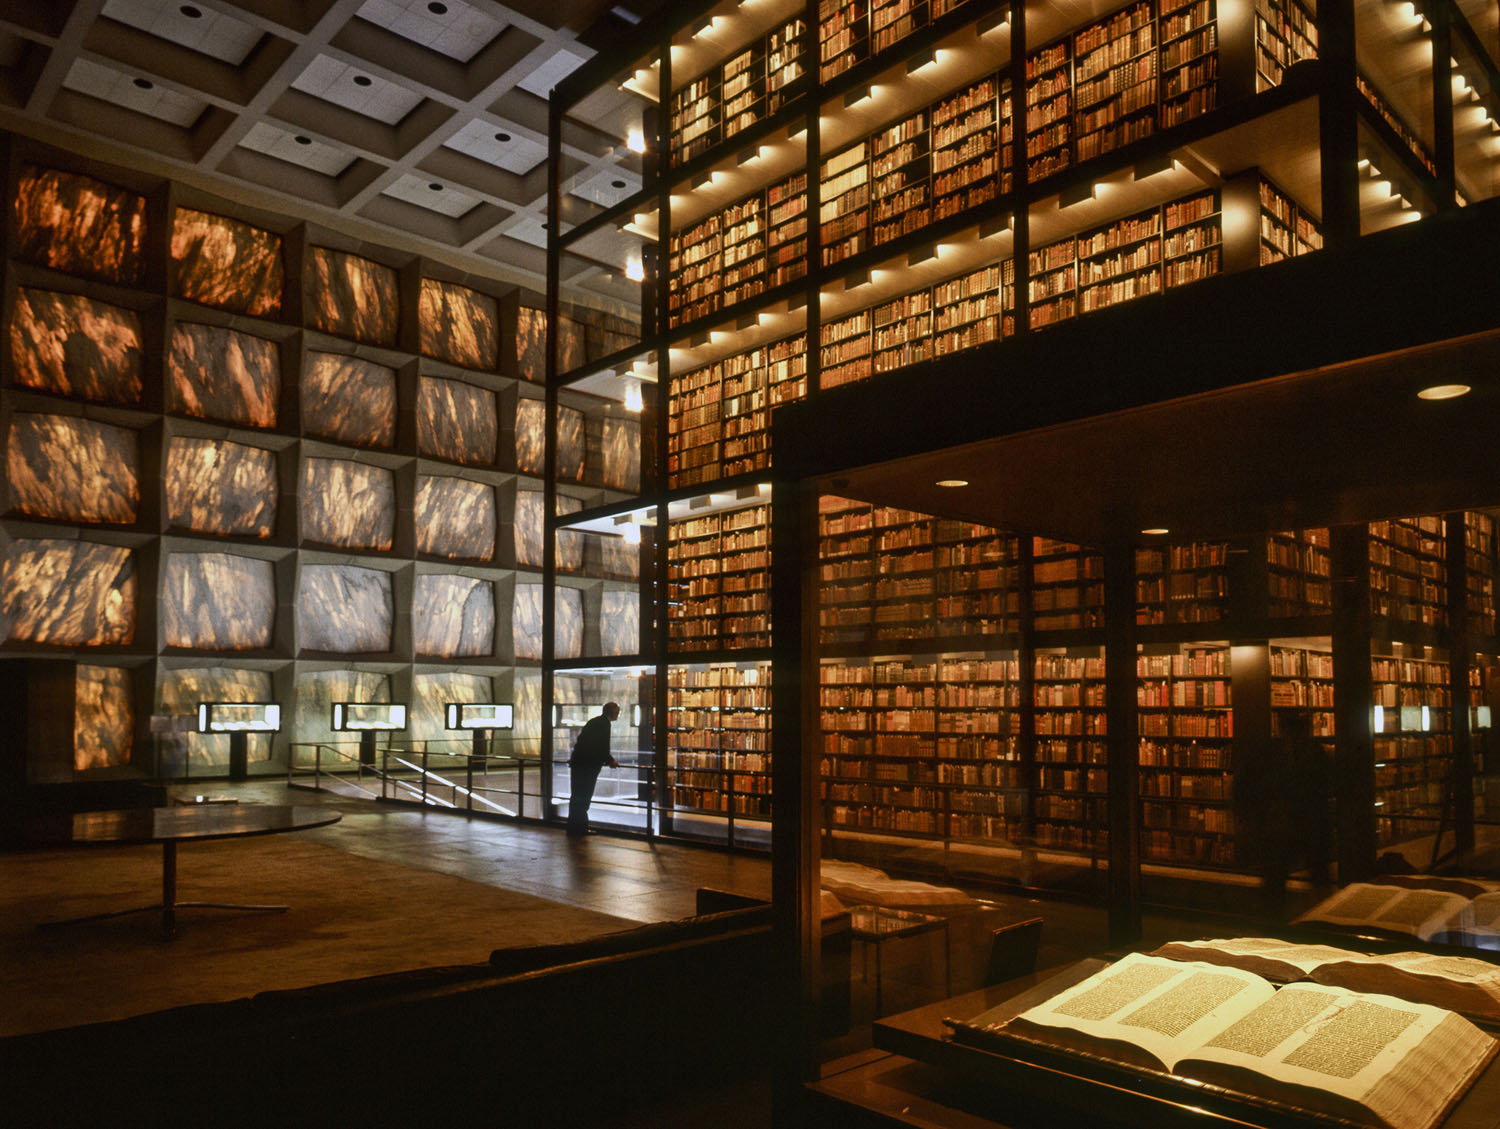 architecture photos library design Beinecke Yale Library